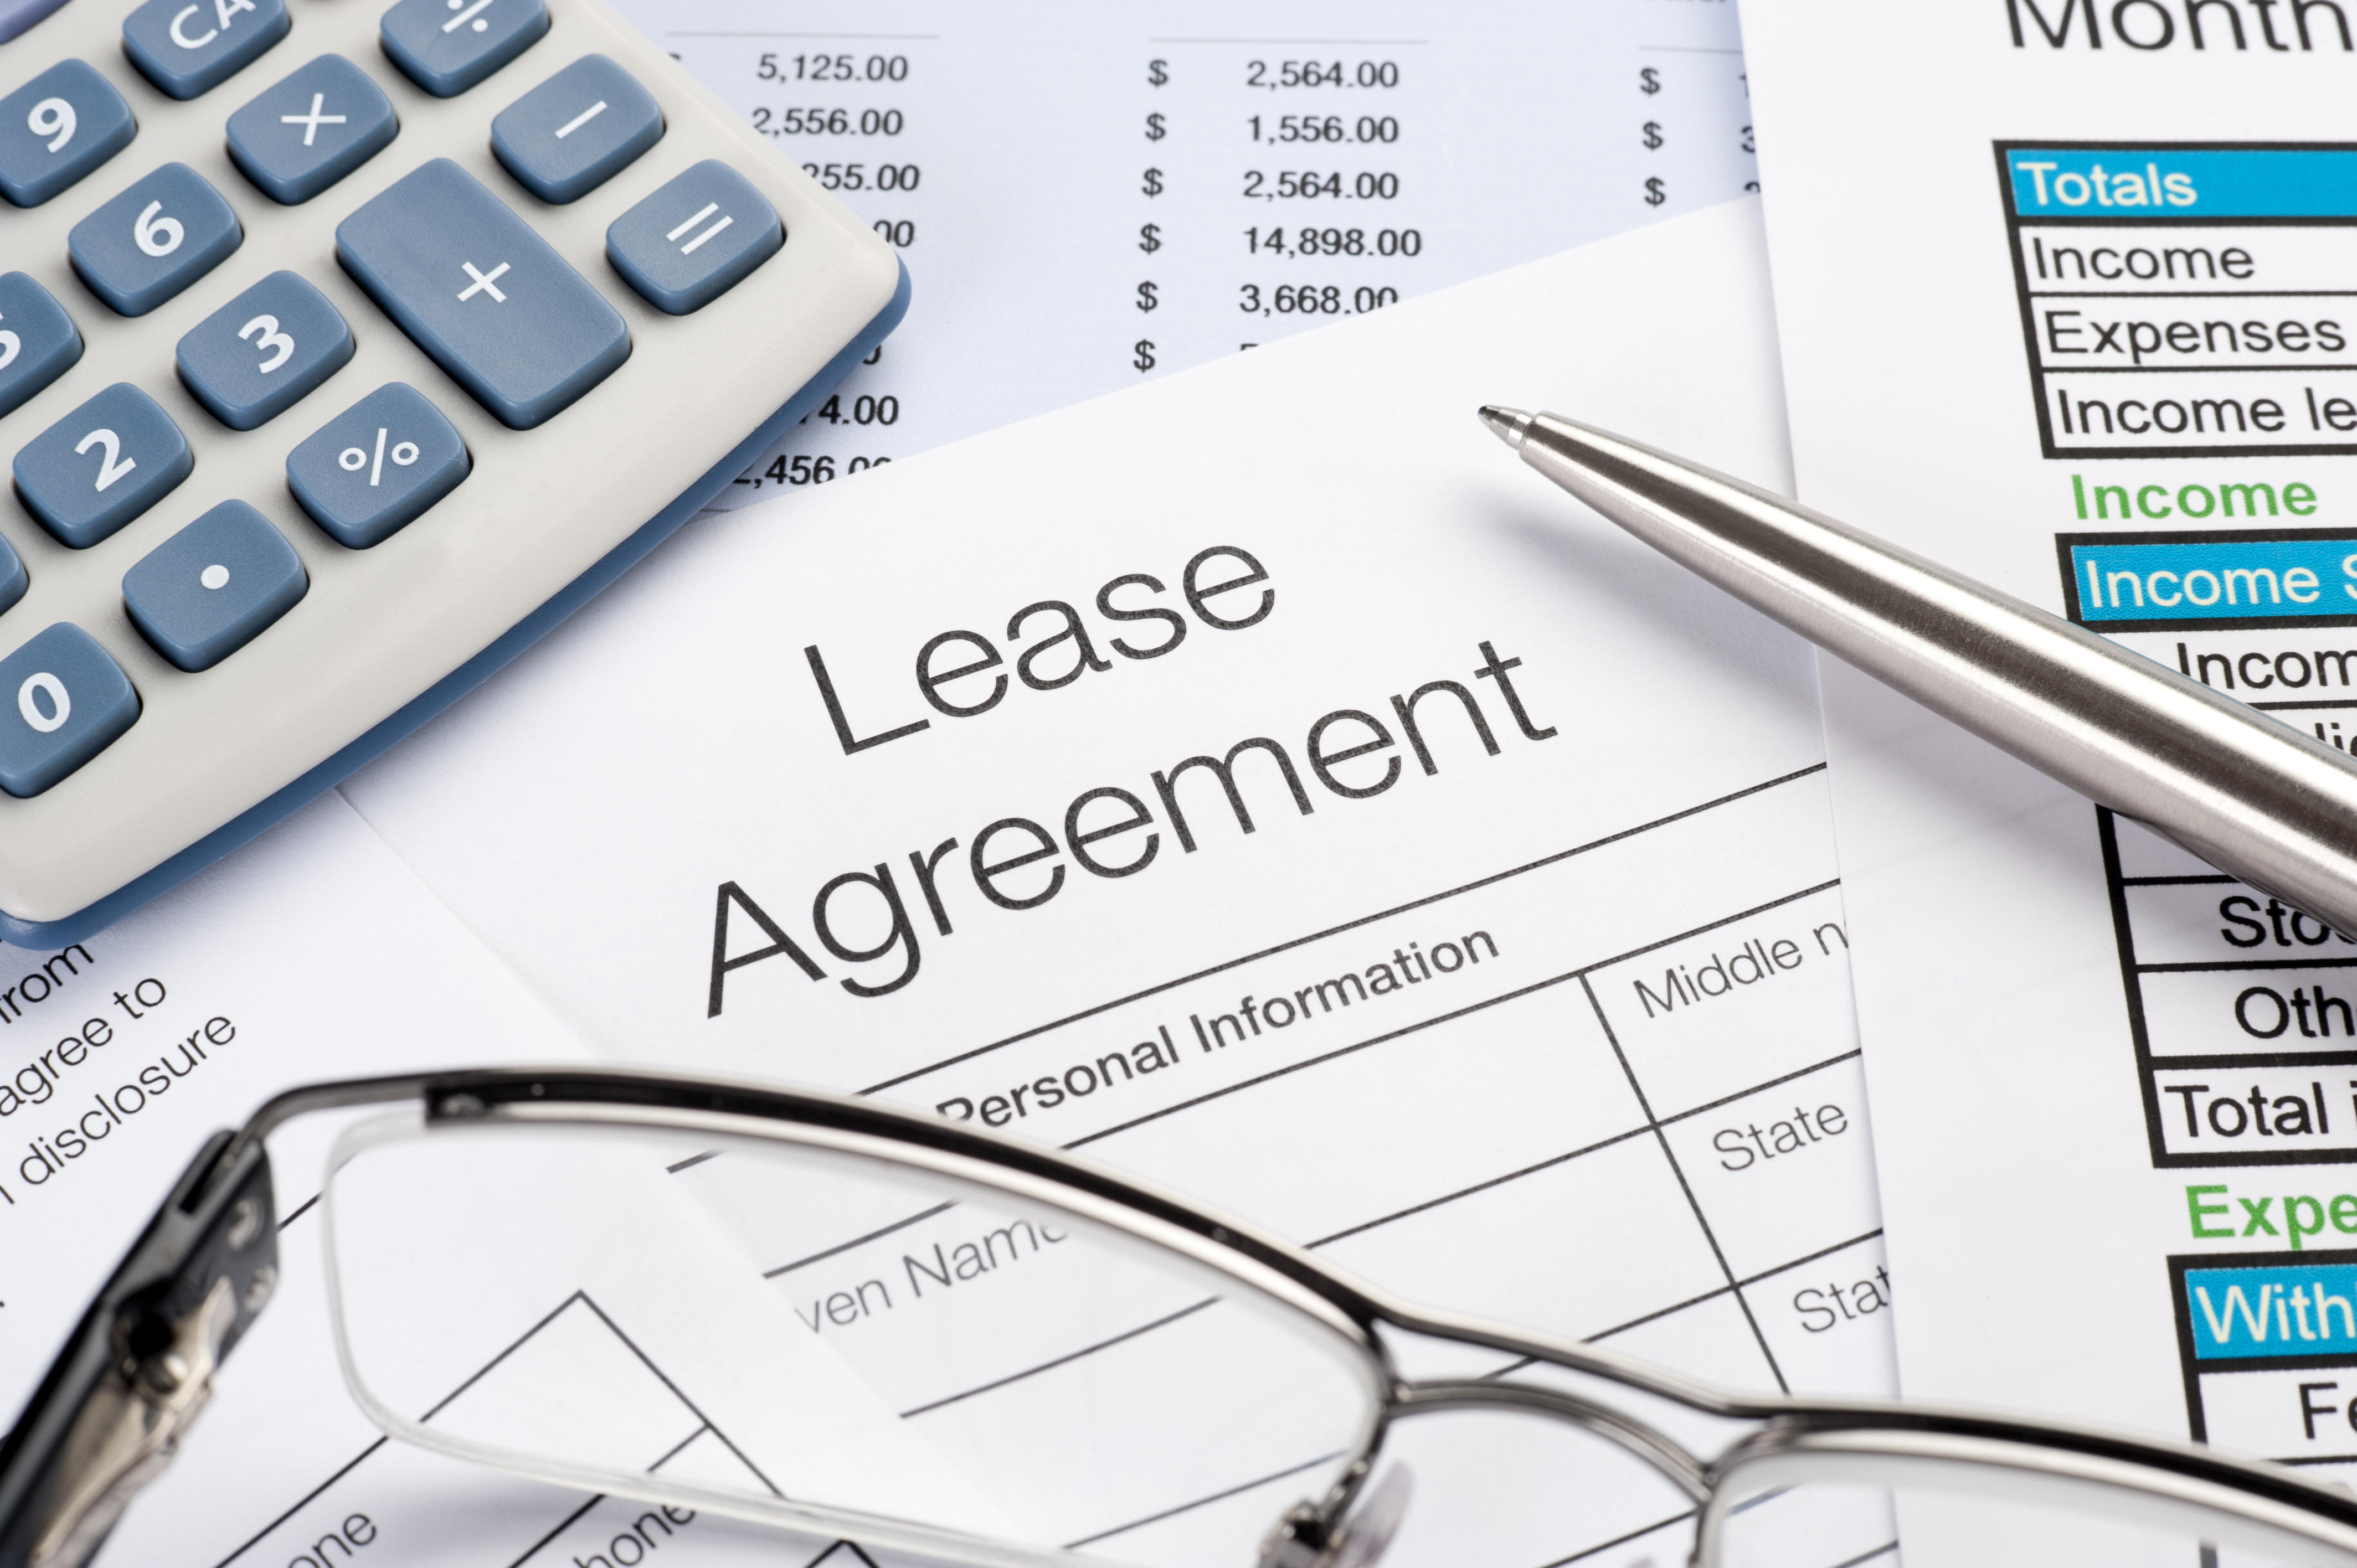 Lawyer Lease Agreement Leasing And Licensing Lawyer Melbourne Lgm Advisors Commercial